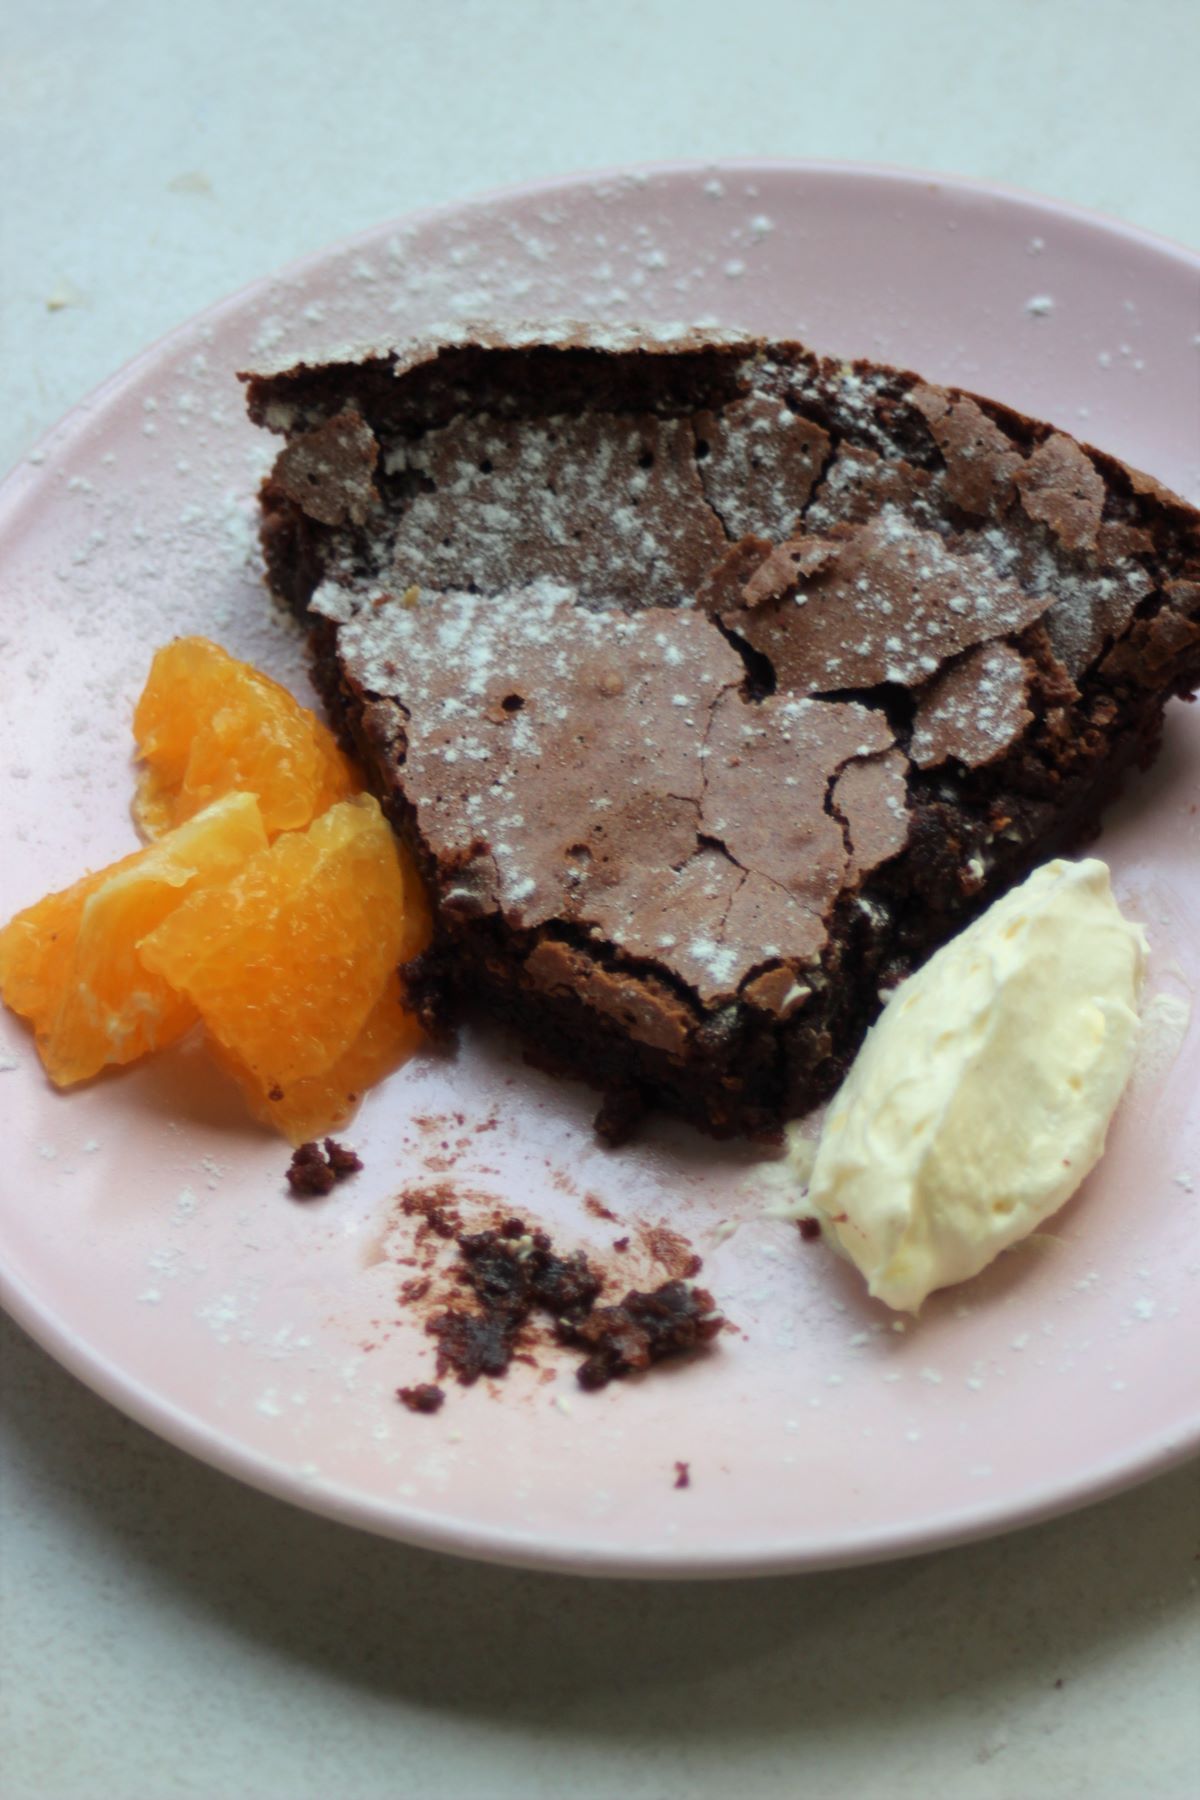 Portion of chocolate cake, without a piece, with oranges slices and whipped cream on a plate.